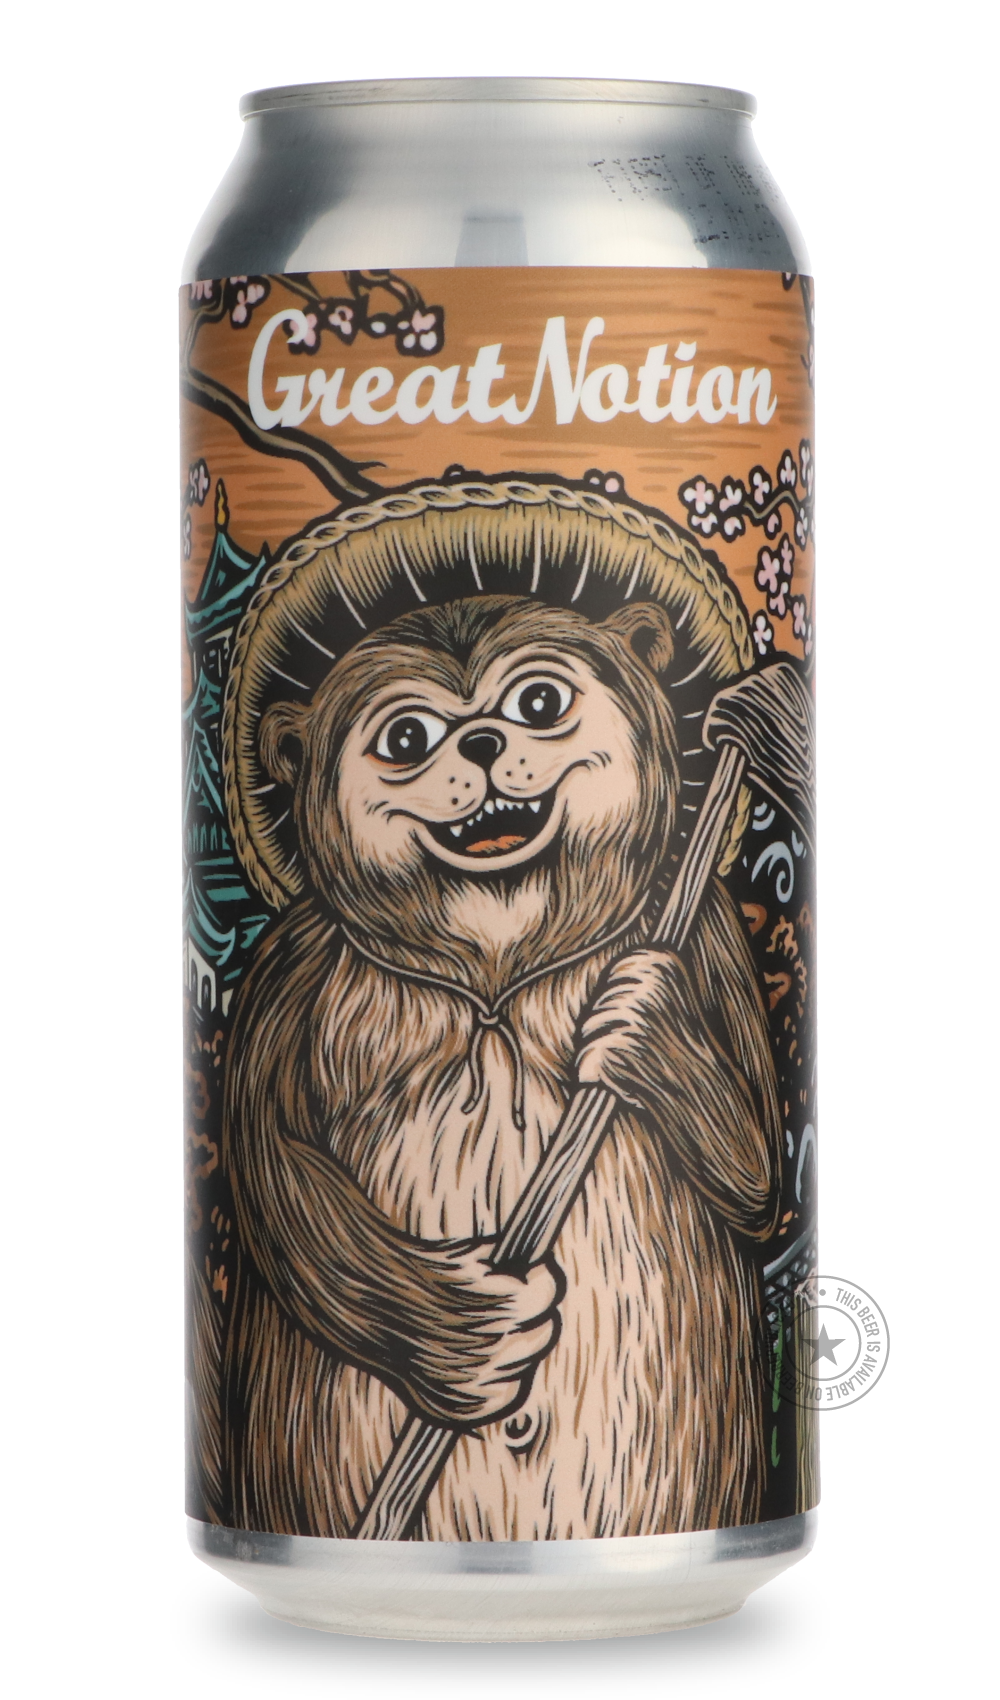 -Great Notion- Passionfruit Mochi-IPA- Only @ Beer Republic - The best online beer store for American & Canadian craft beer - Buy beer online from the USA and Canada - Bier online kopen - Amerikaans bier kopen - Craft beer store - Craft beer kopen - Amerikanisch bier kaufen - Bier online kaufen - Acheter biere online - IPA - Stout - Porter - New England IPA - Hazy IPA - Imperial Stout - Barrel Aged - Barrel Aged Imperial Stout - Brown - Dark beer - Blond - Blonde - Pilsner - Lager - Wheat - Weizen - Amber -